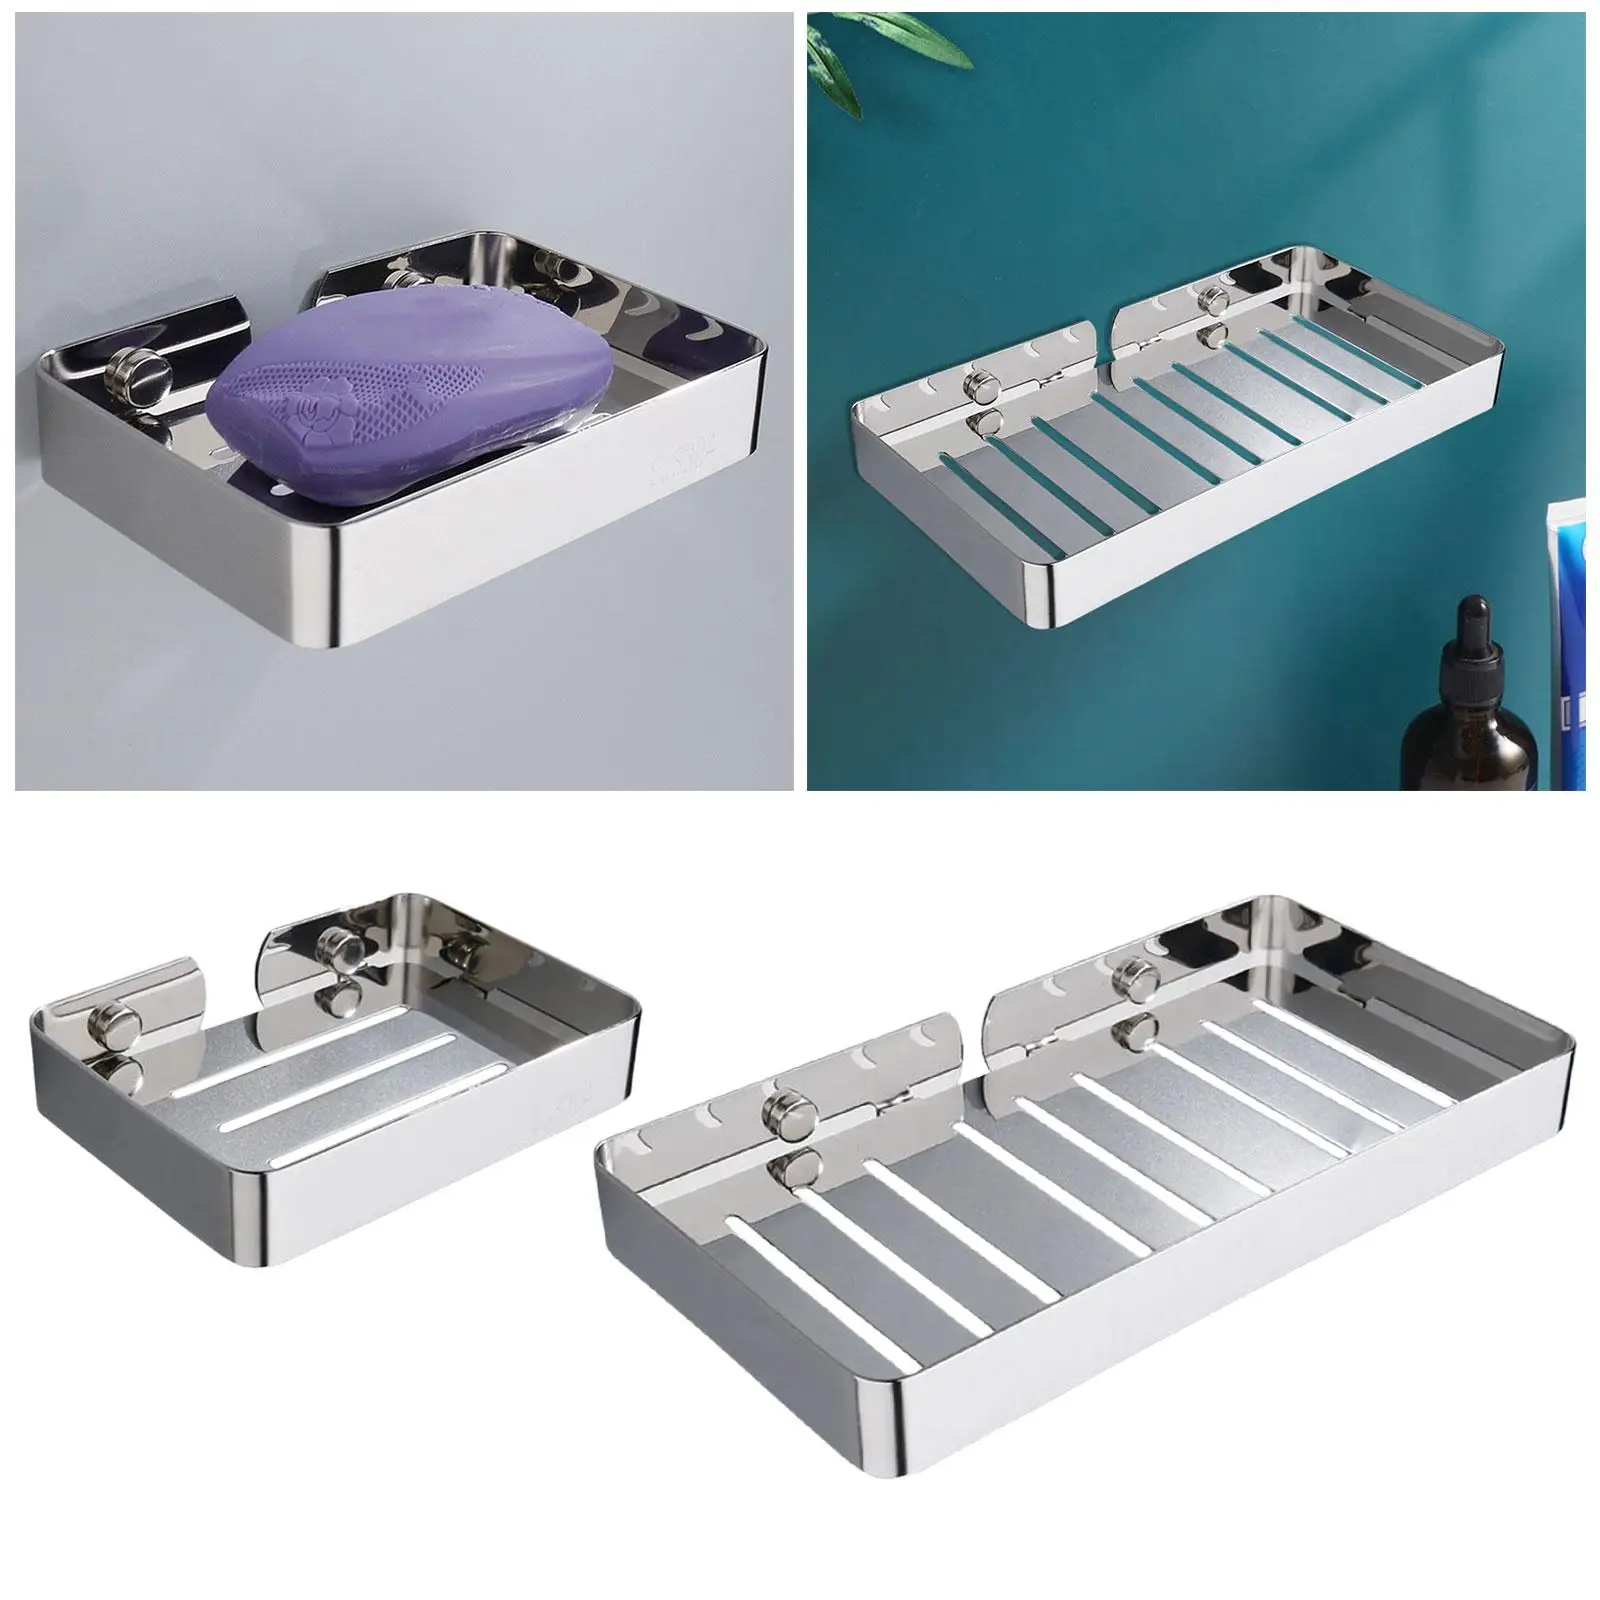 https://ae01.alicdn.com/kf/Sf5e18d16ff5b49aeb34a3860d93636b7m/Stainless-Steel-Soap-Holder-Silver-Wall-Mounted-Soap-Tray-for-Bathroom-Kitchen-Home.jpg